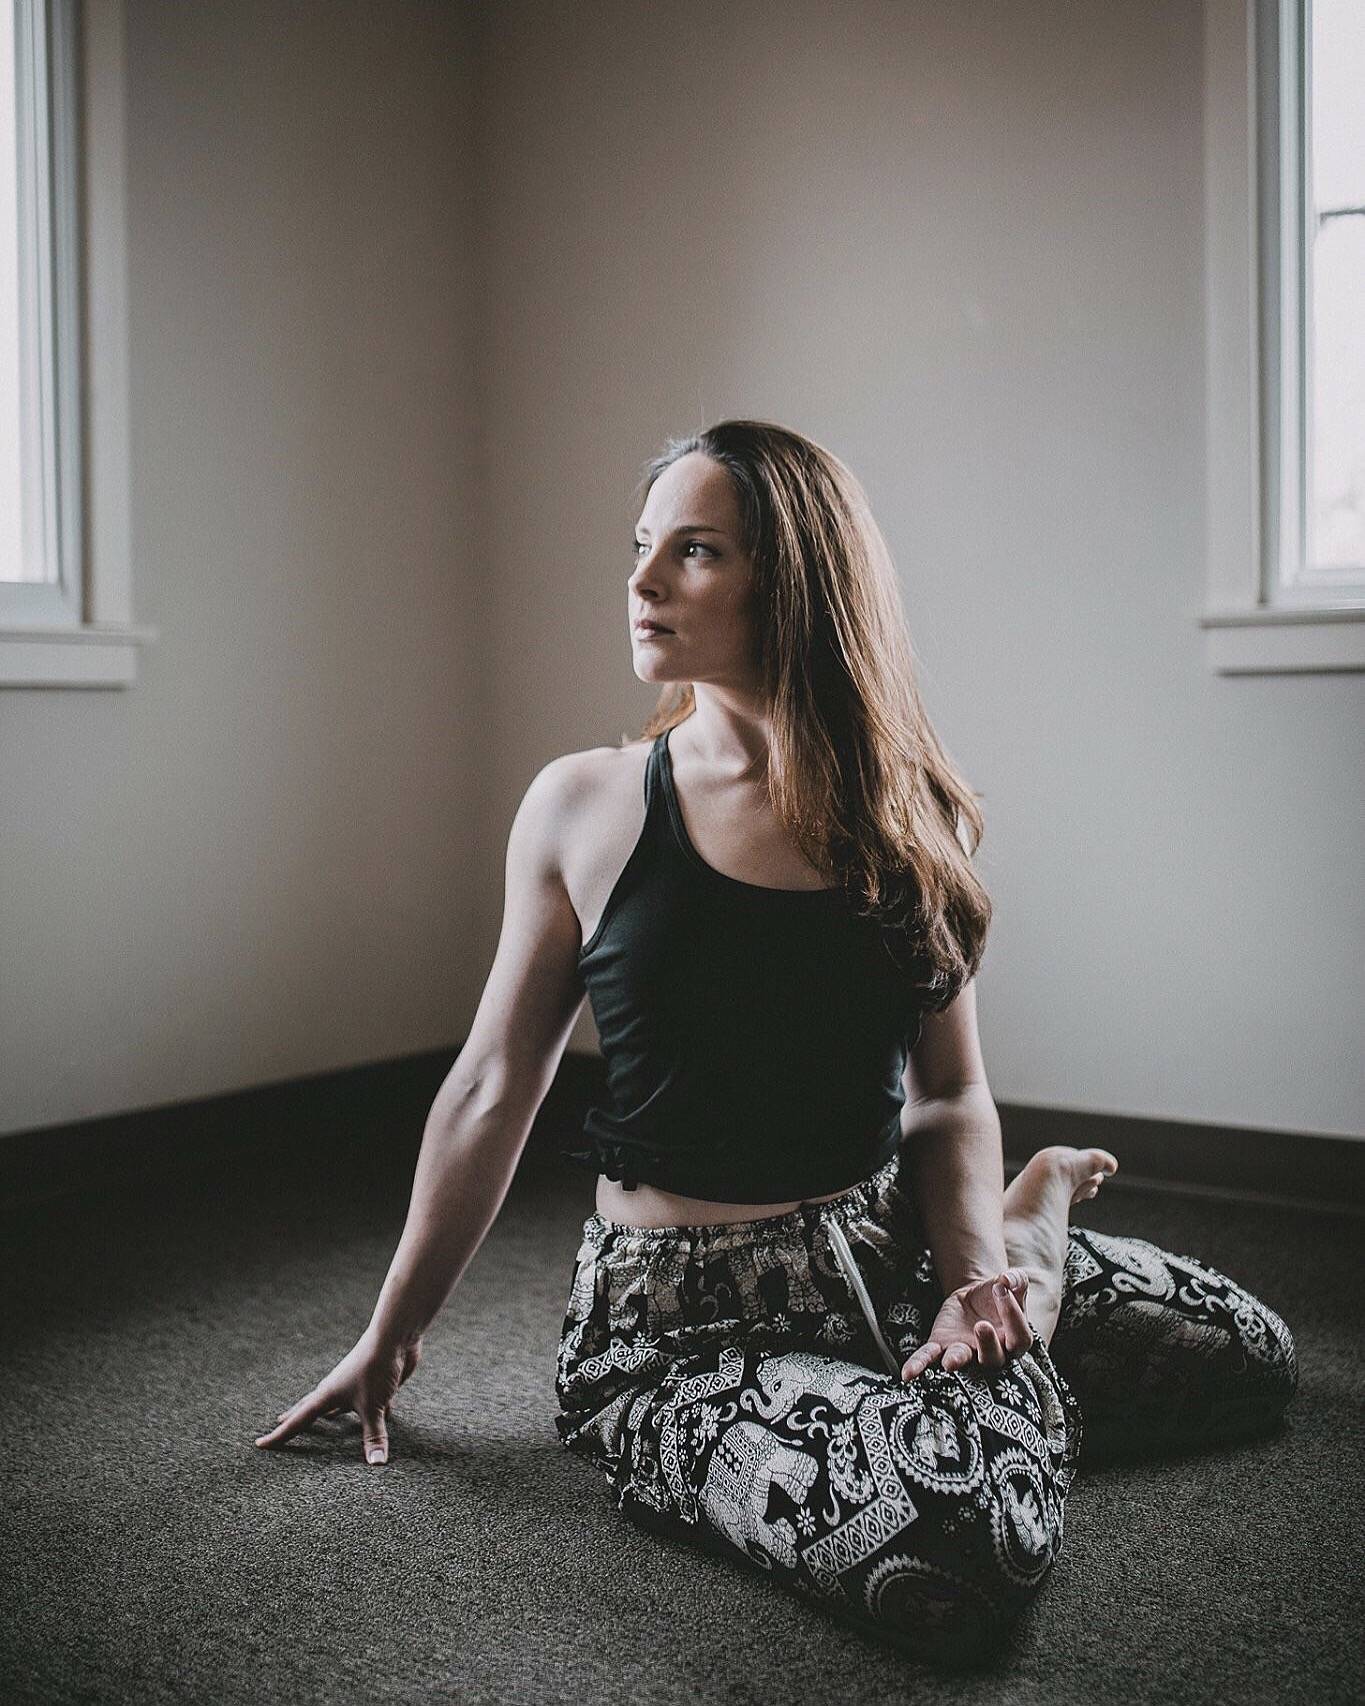 A Year of Living your Yoga: Daily Practices to Shape your Life by Judith Hanson Lasater l The Community Hub l Mukha Yoga